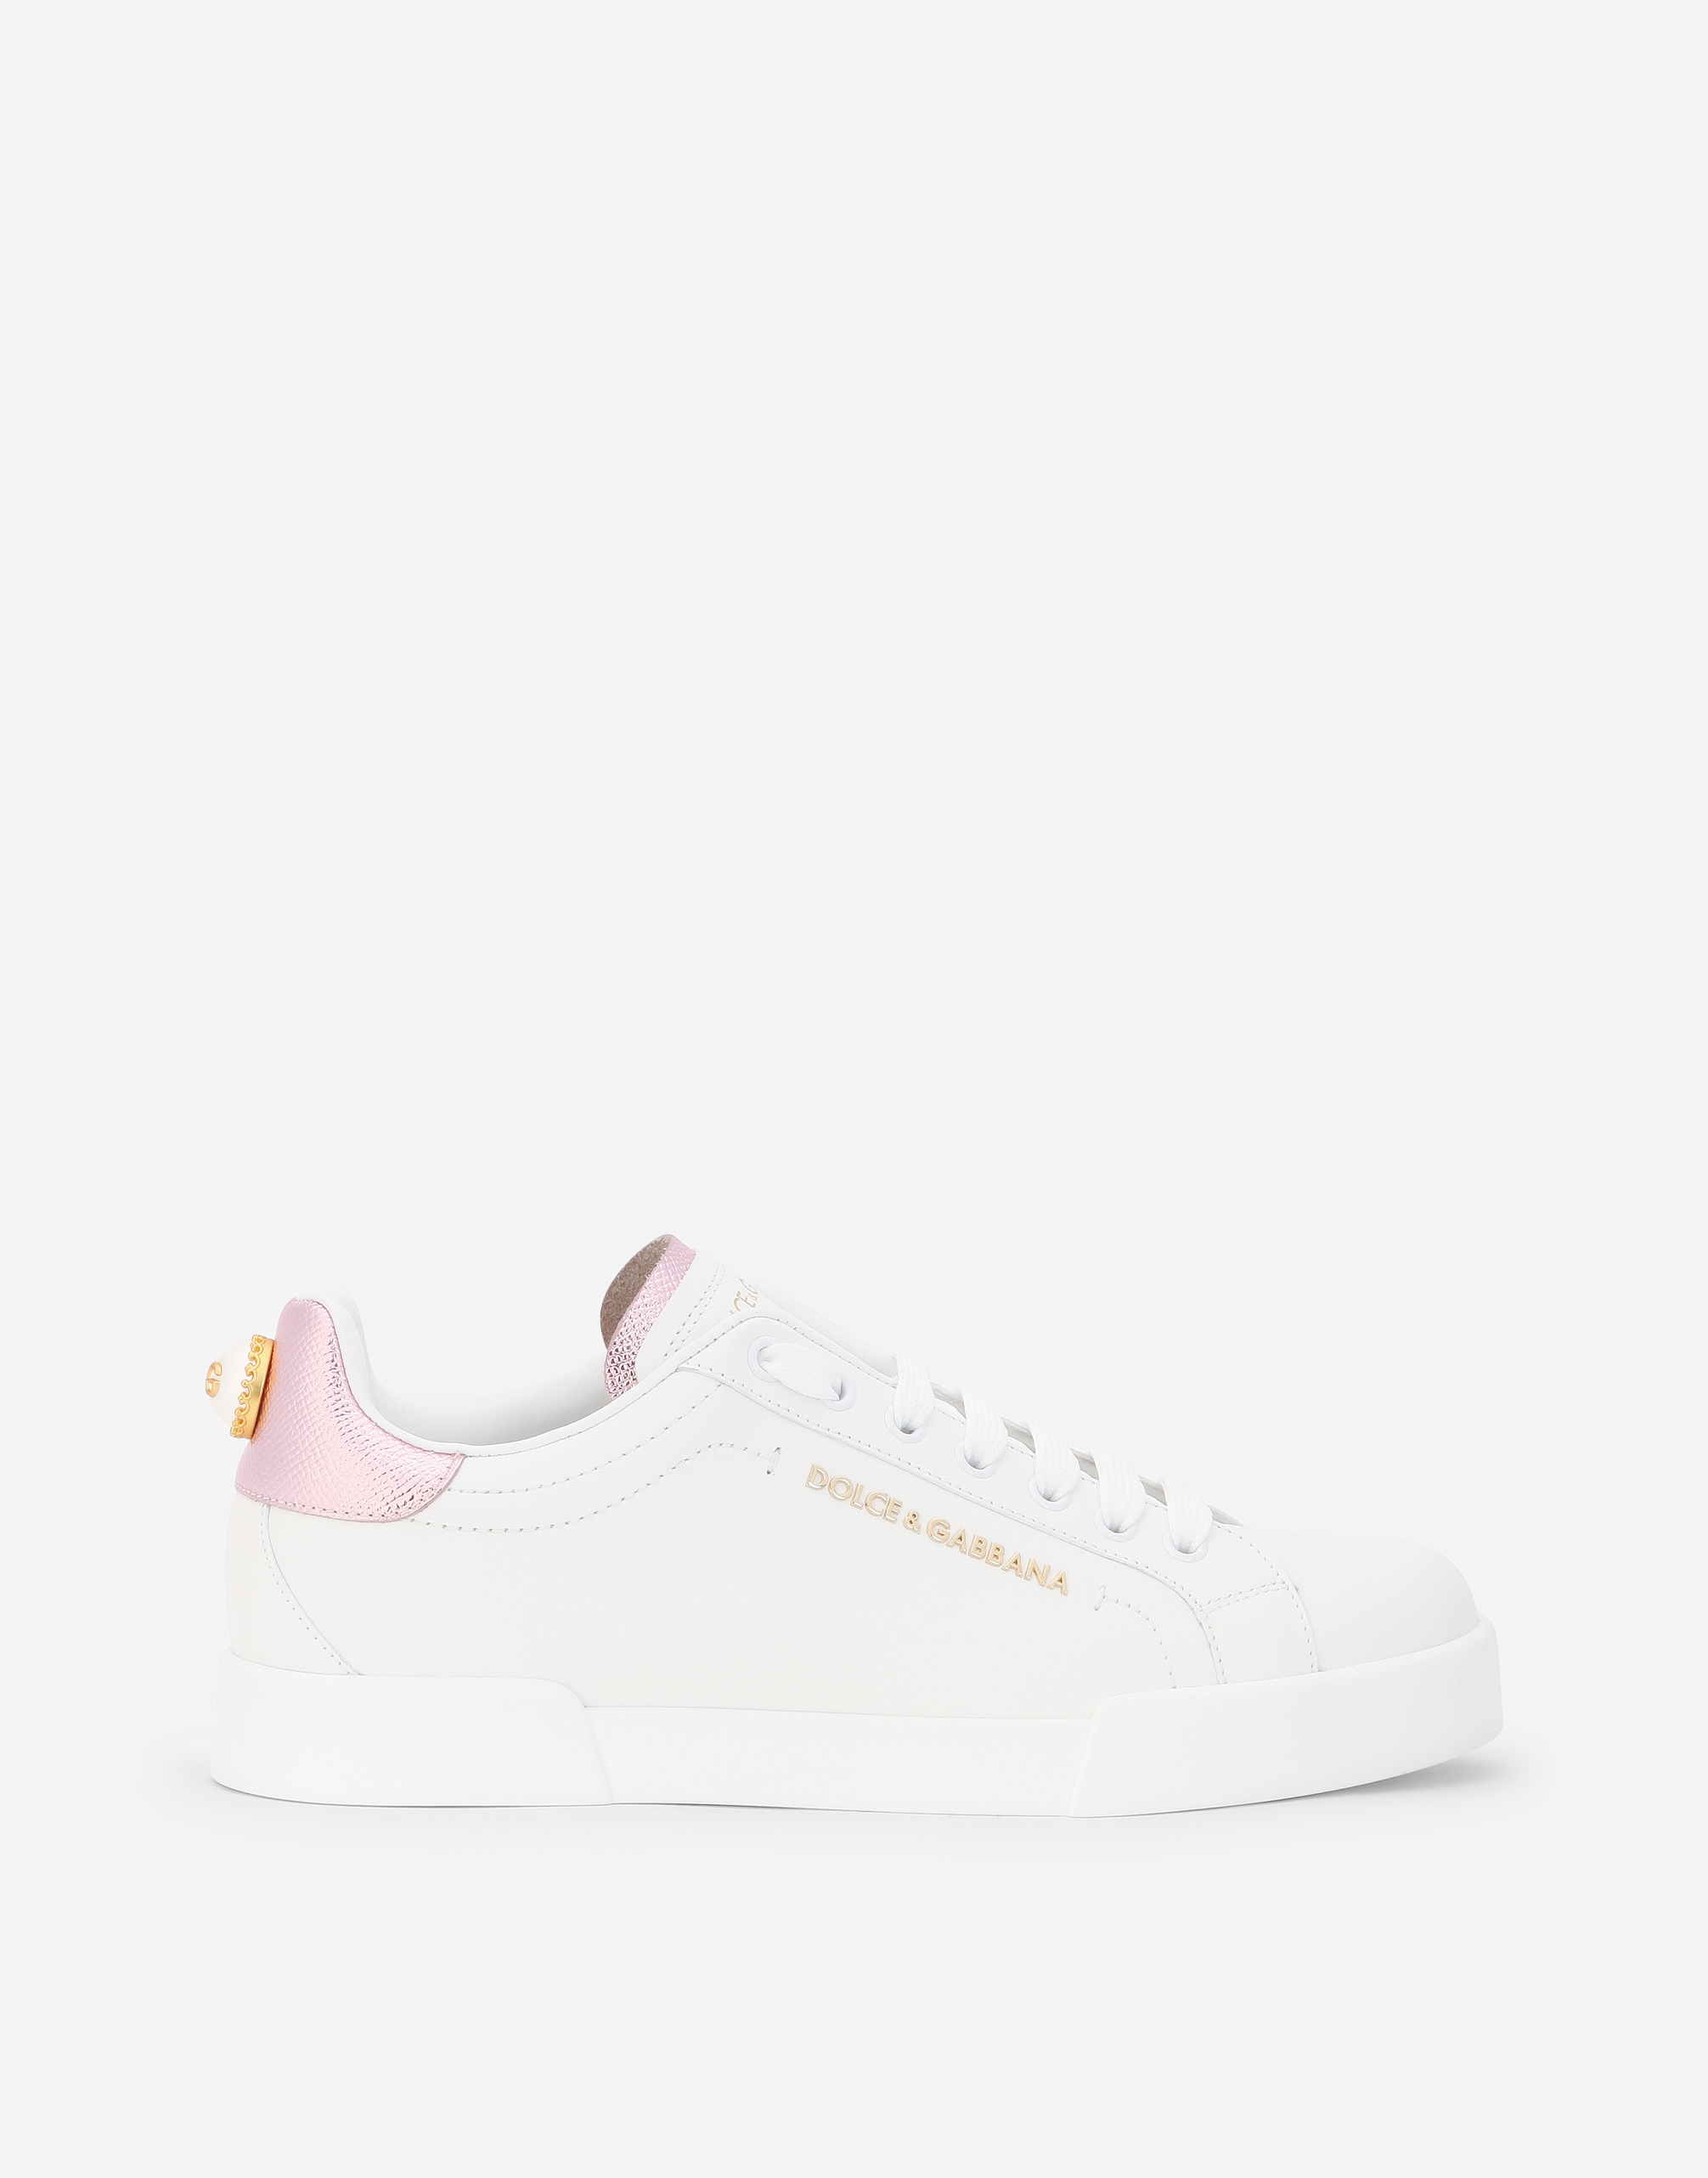 Portofino sneakers in nappa calfskin with lettering in White/Pink